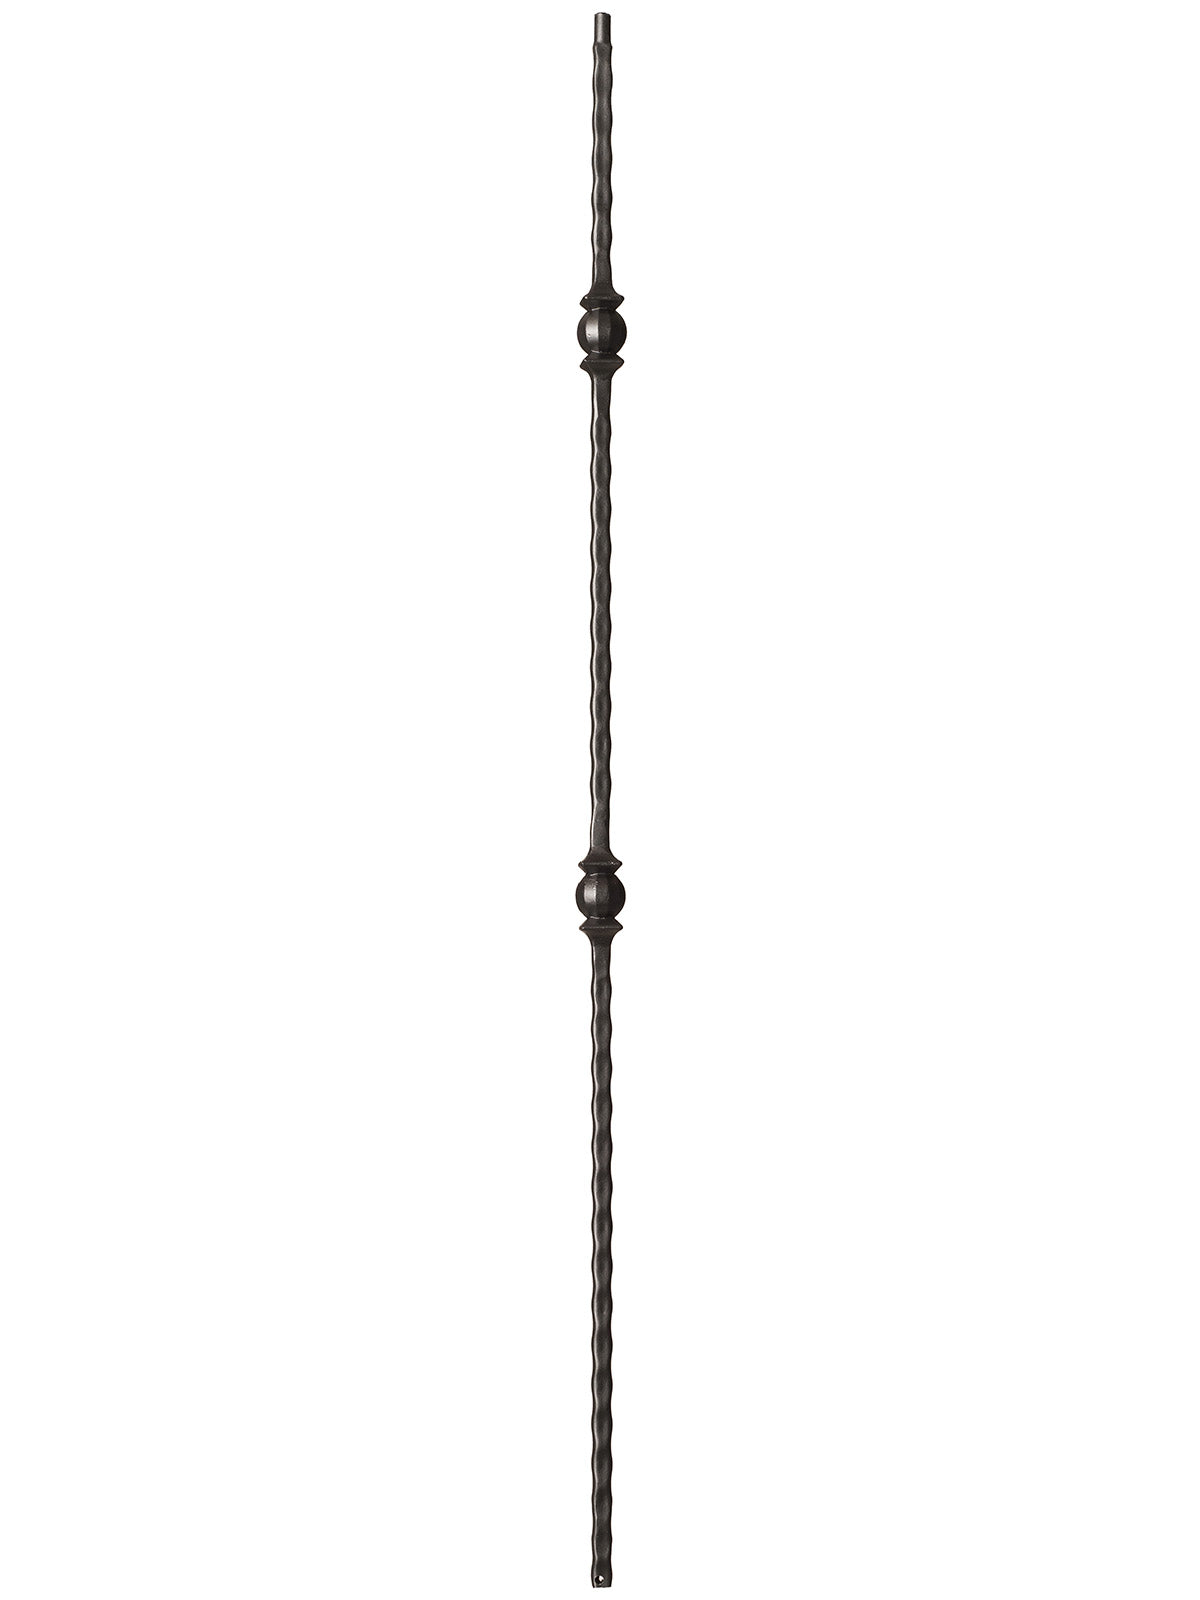 Iron Baluster 9033 - 9/16" Hammered Face - Double Ball